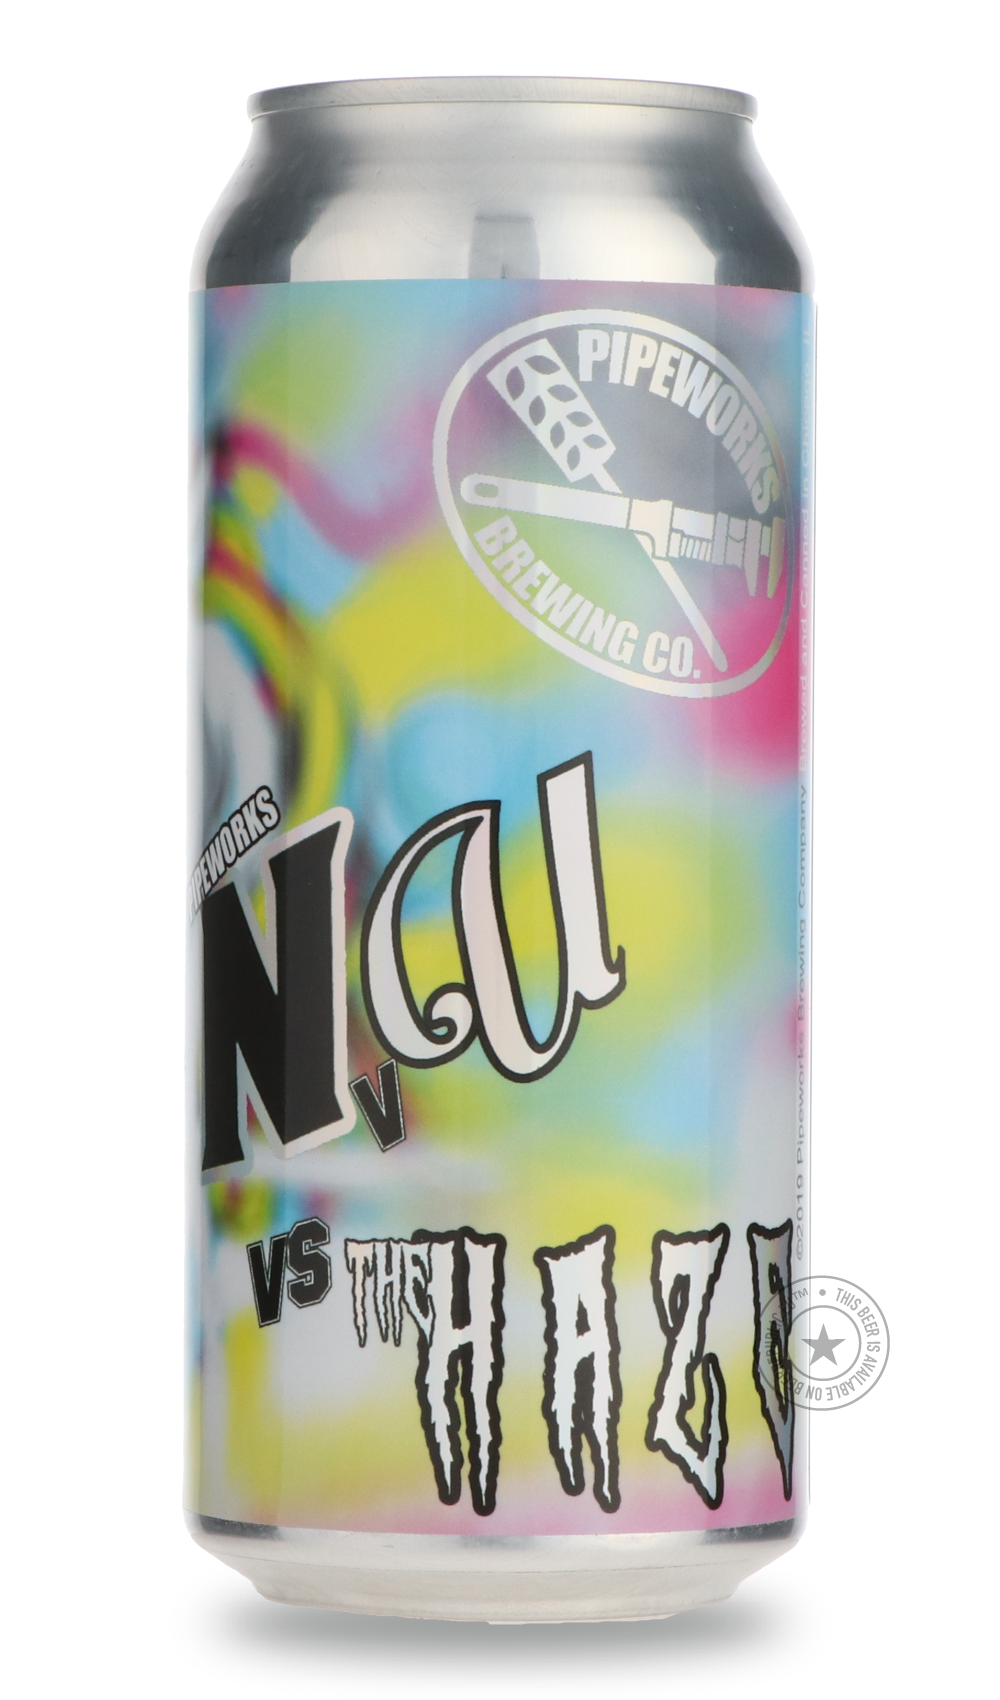 -Pipeworks- NvU vs. The Haze-IPA- Only @ Beer Republic - The best online beer store for American & Canadian craft beer - Buy beer online from the USA and Canada - Bier online kopen - Amerikaans bier kopen - Craft beer store - Craft beer kopen - Amerikanisch bier kaufen - Bier online kaufen - Acheter biere online - IPA - Stout - Porter - New England IPA - Hazy IPA - Imperial Stout - Barrel Aged - Barrel Aged Imperial Stout - Brown - Dark beer - Blond - Blonde - Pilsner - Lager - Wheat - Weizen - Amber - Barl